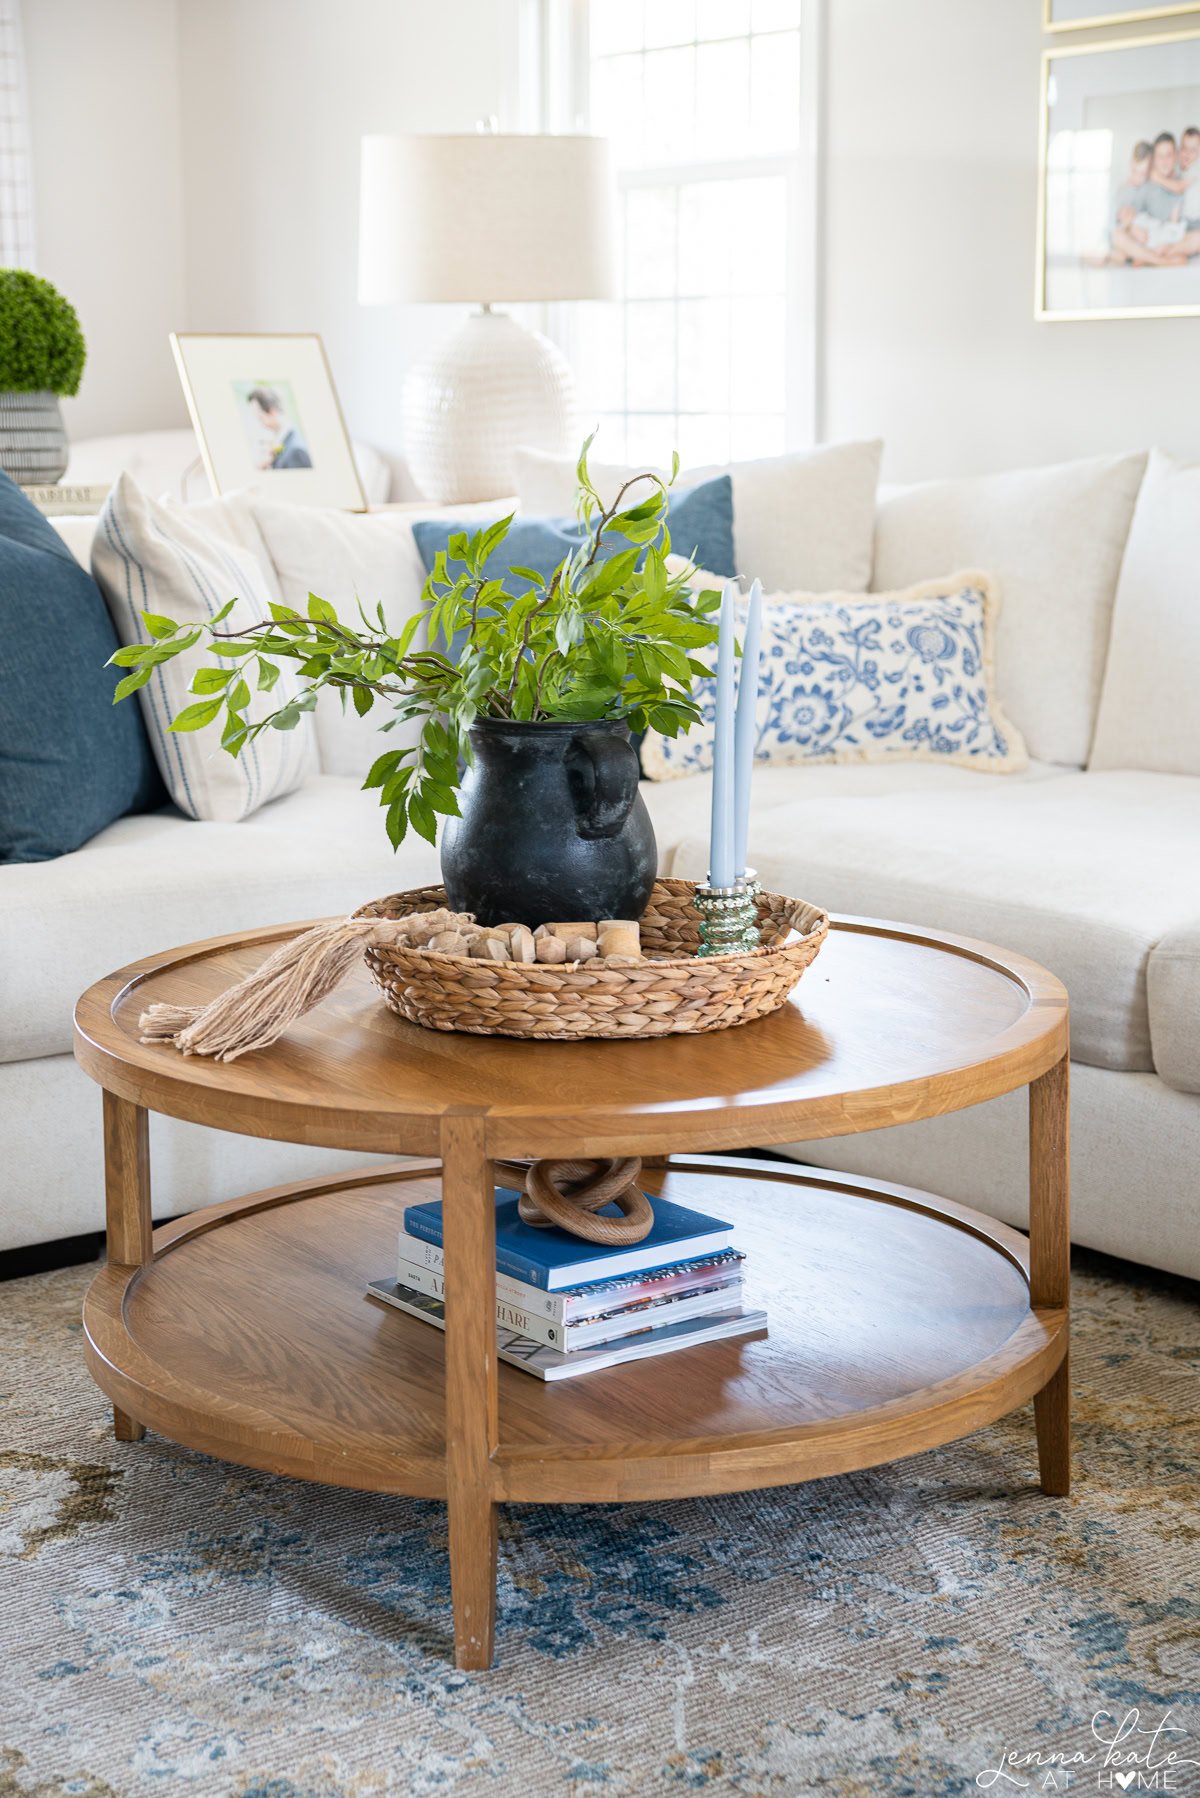 close up of round wooden coffee table with a vase of greenery.